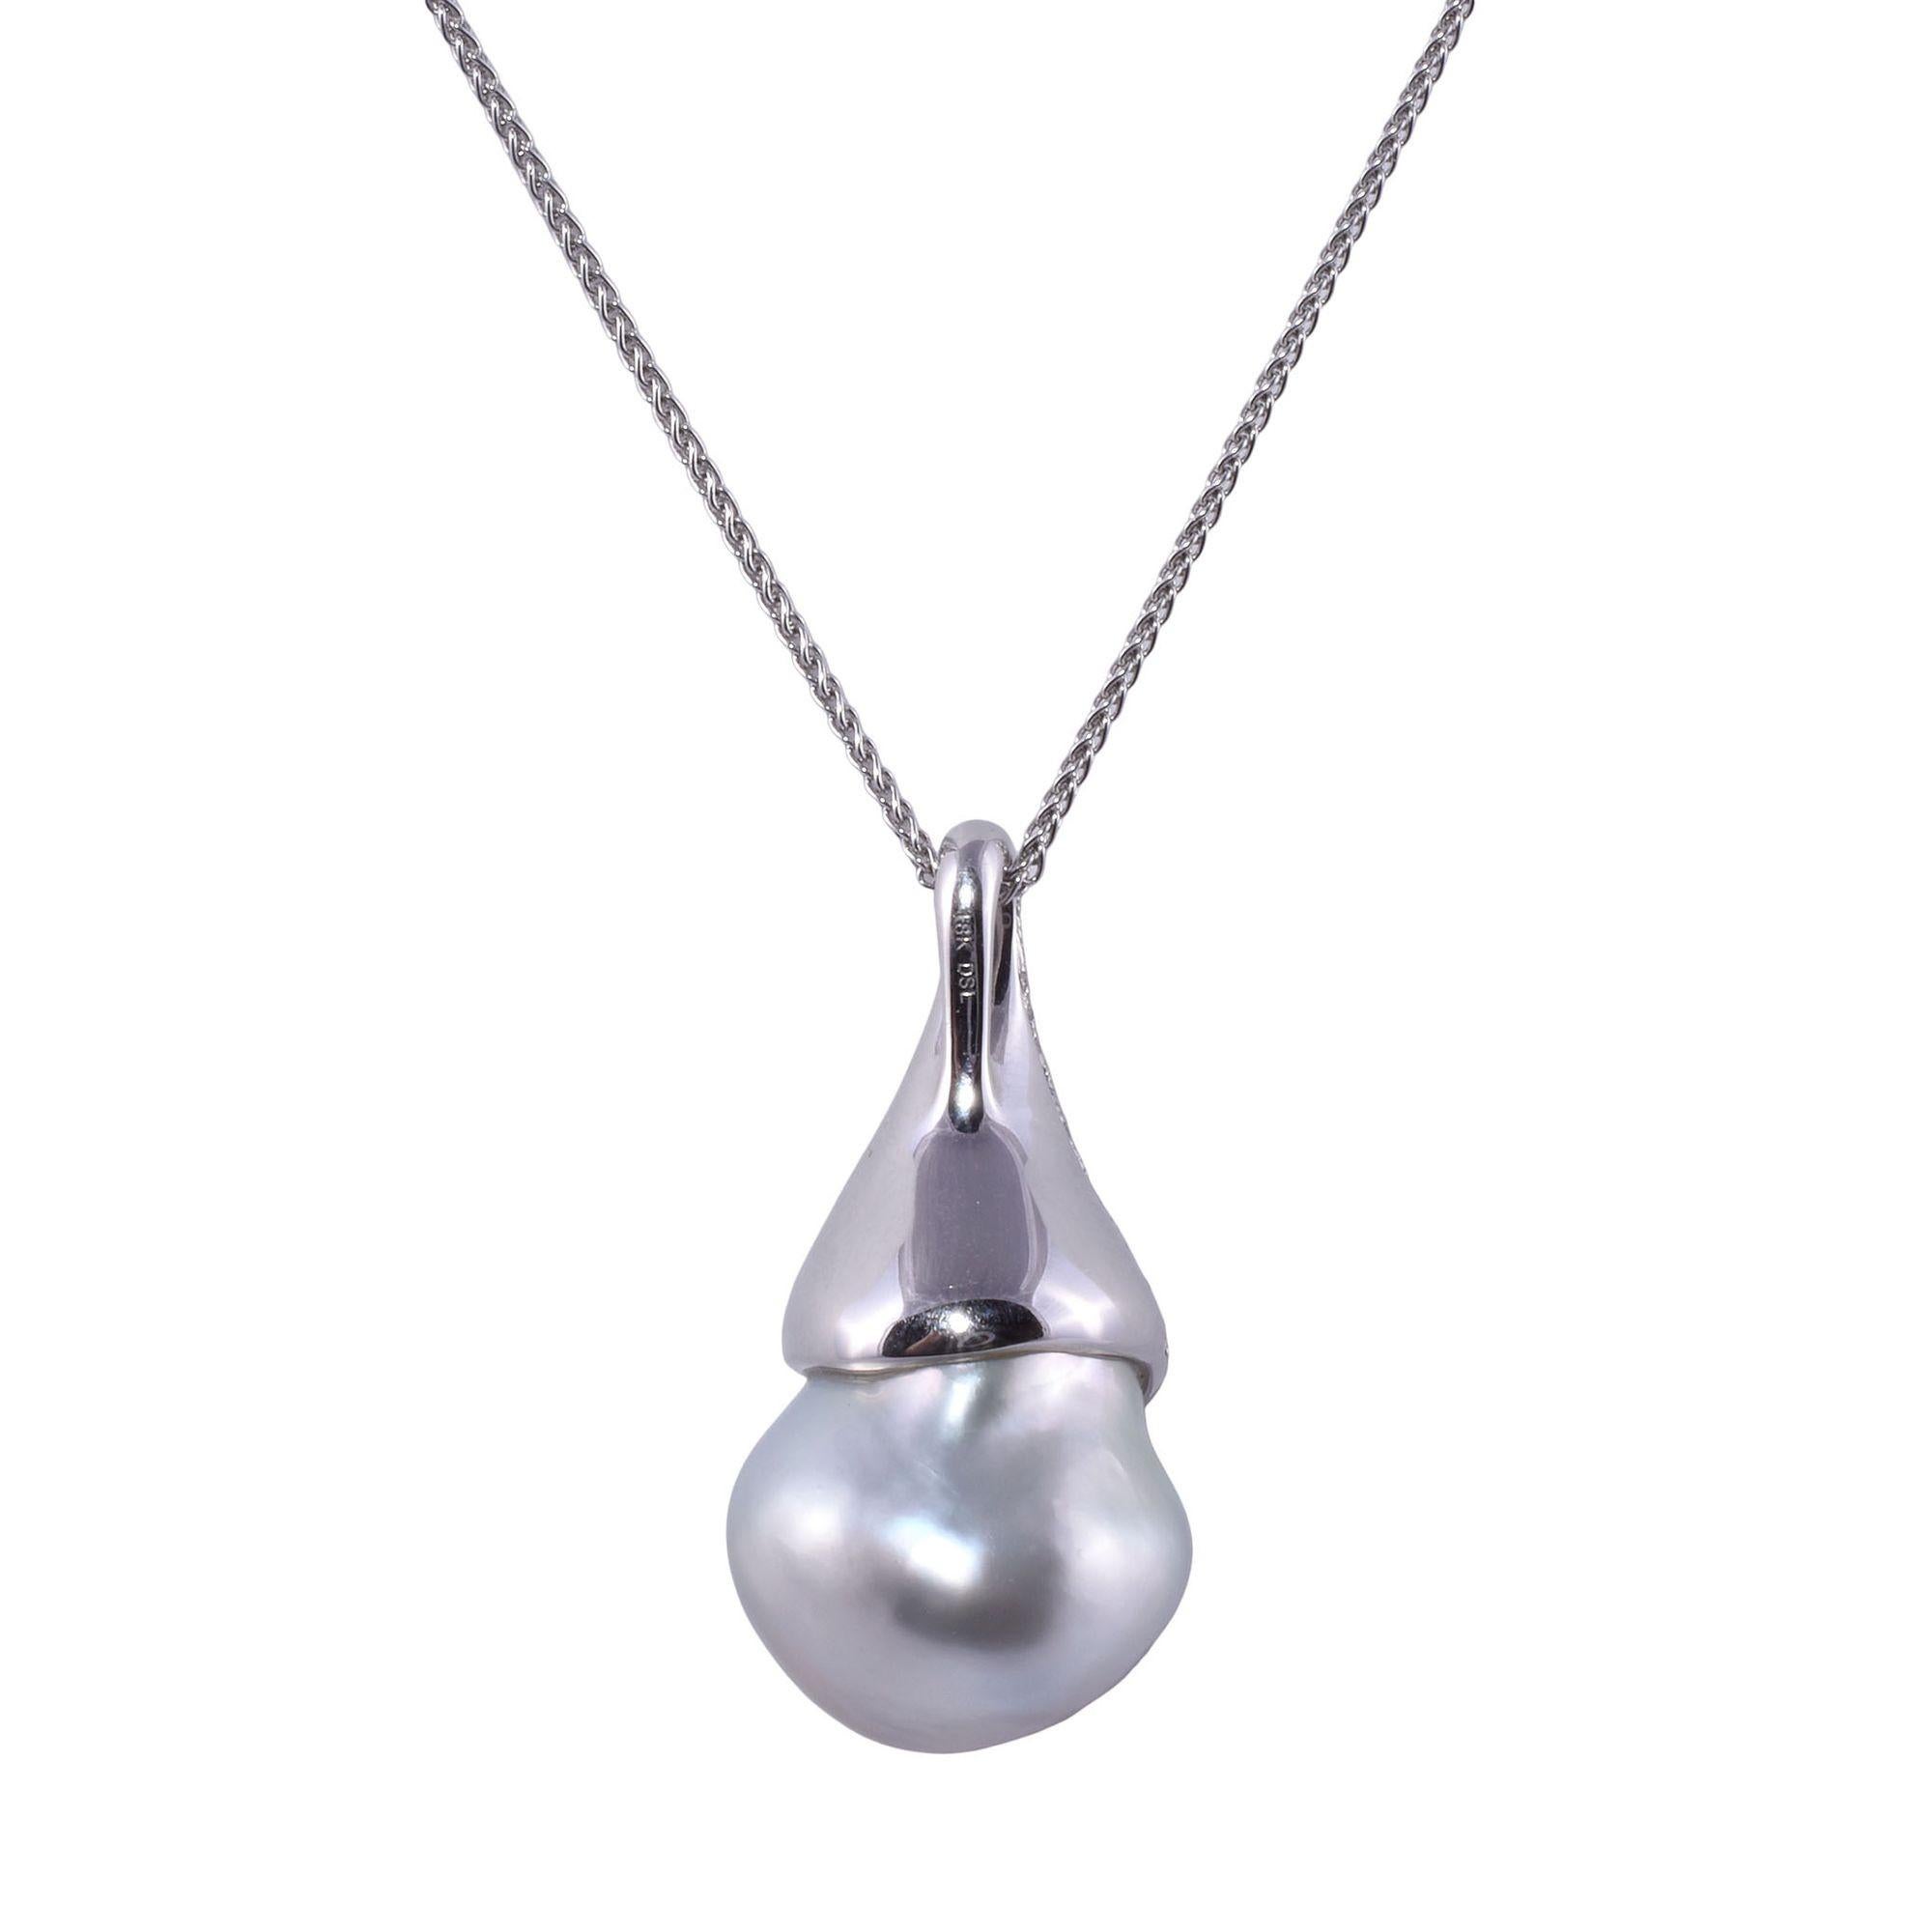 Estate rare large baroque South Seas pearl pendant necklace. This 18 karat white gold pendant features a large baroque cultured South Seas pearl with pink and blue overtones. The pearl measures 18.3mm x 15.15mm. Pearls of this size are quite rare.